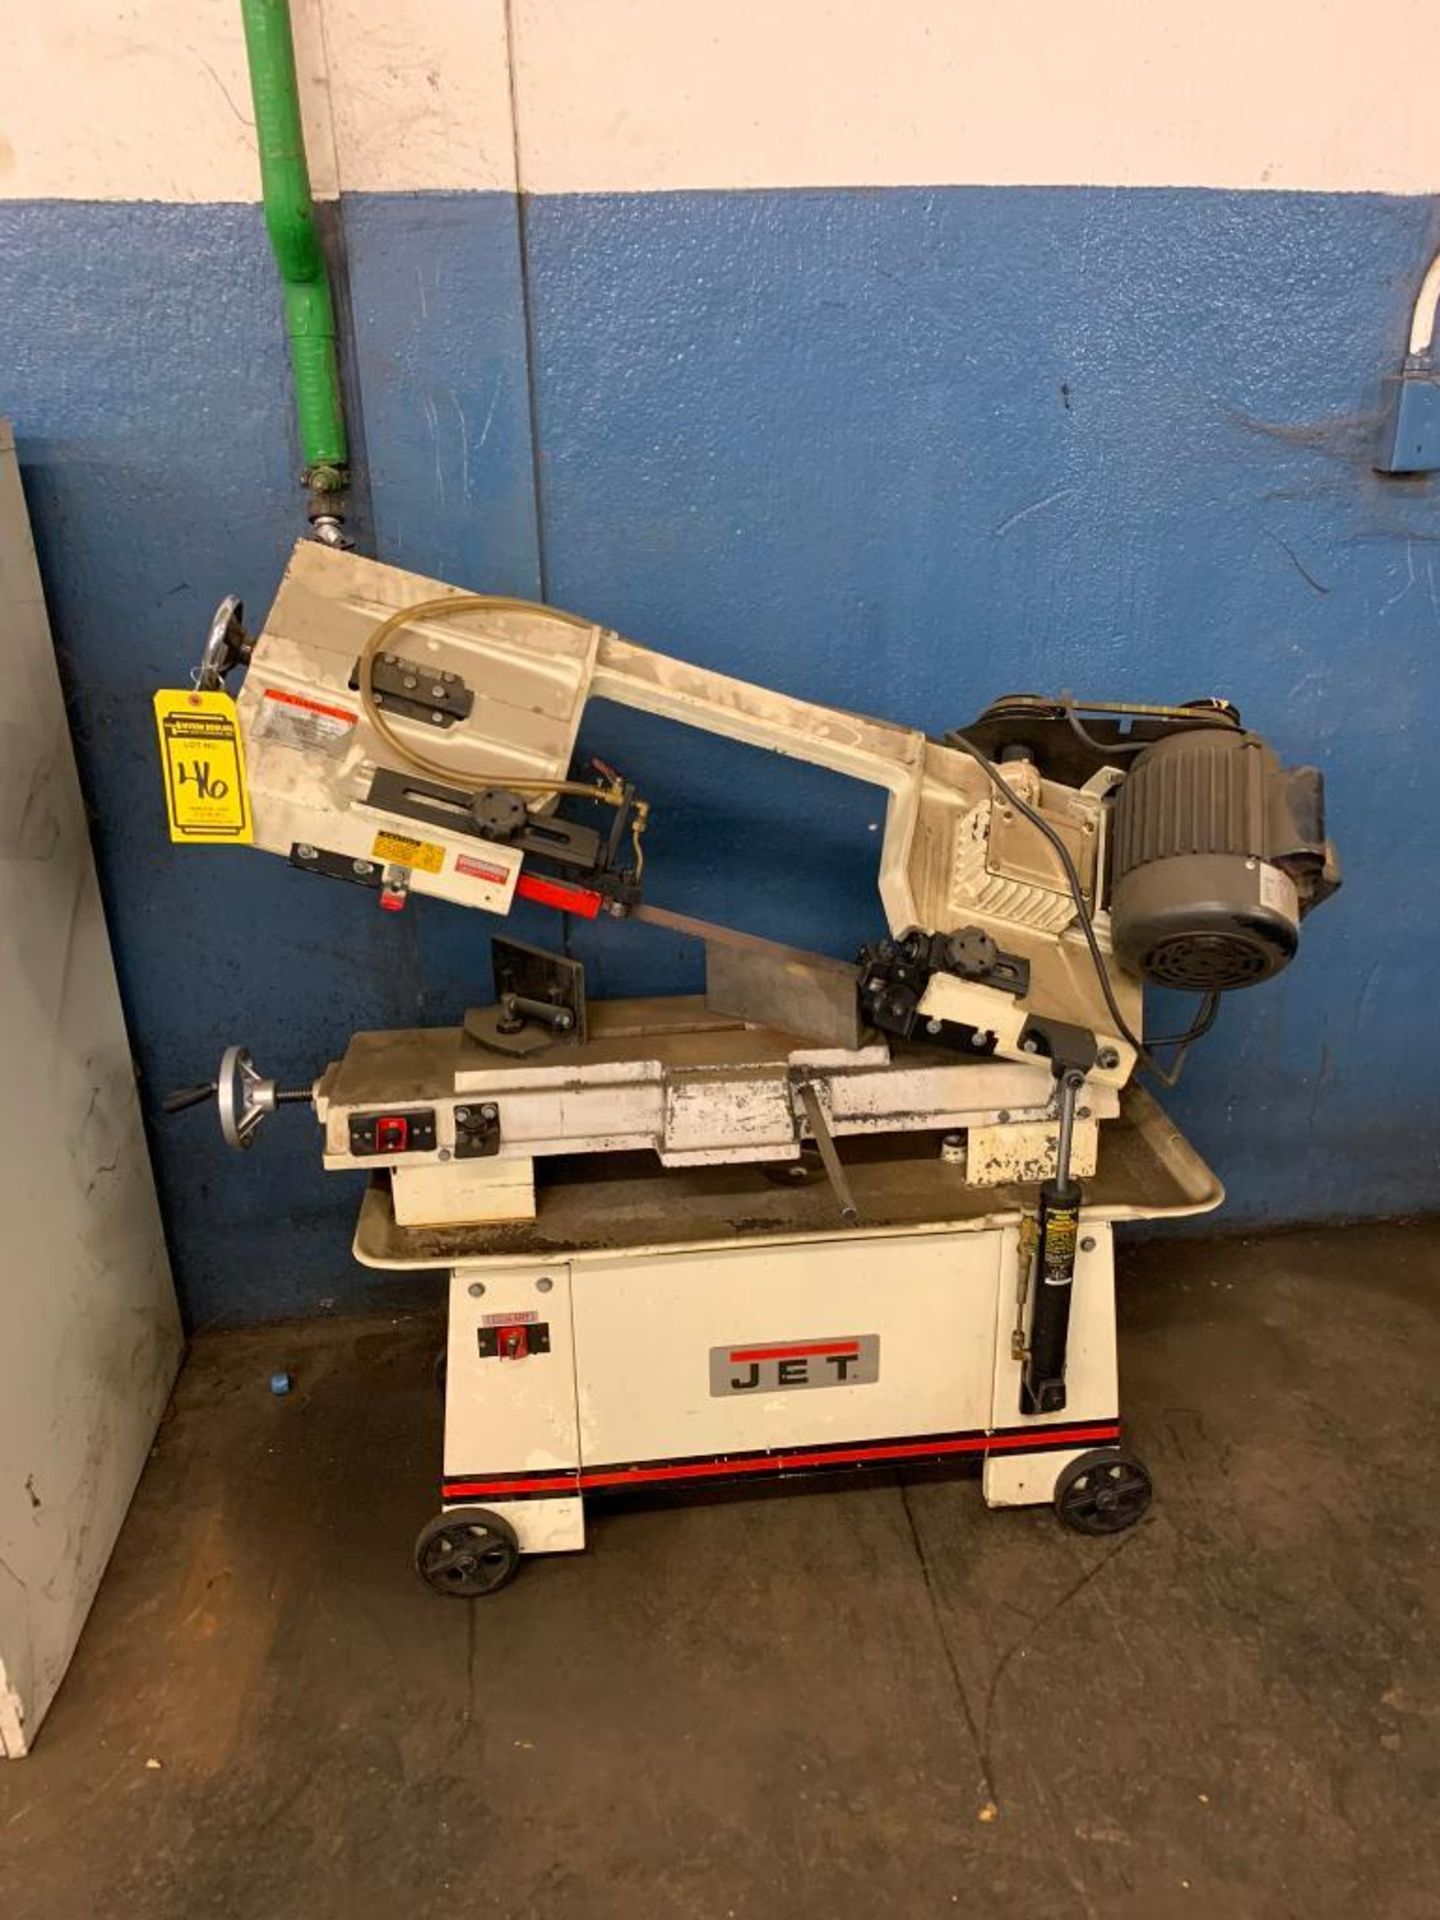 Jet Horizontal Band Saw, 3/4-HP Motor ($50 Loading Fee will be added to buyers invoice)